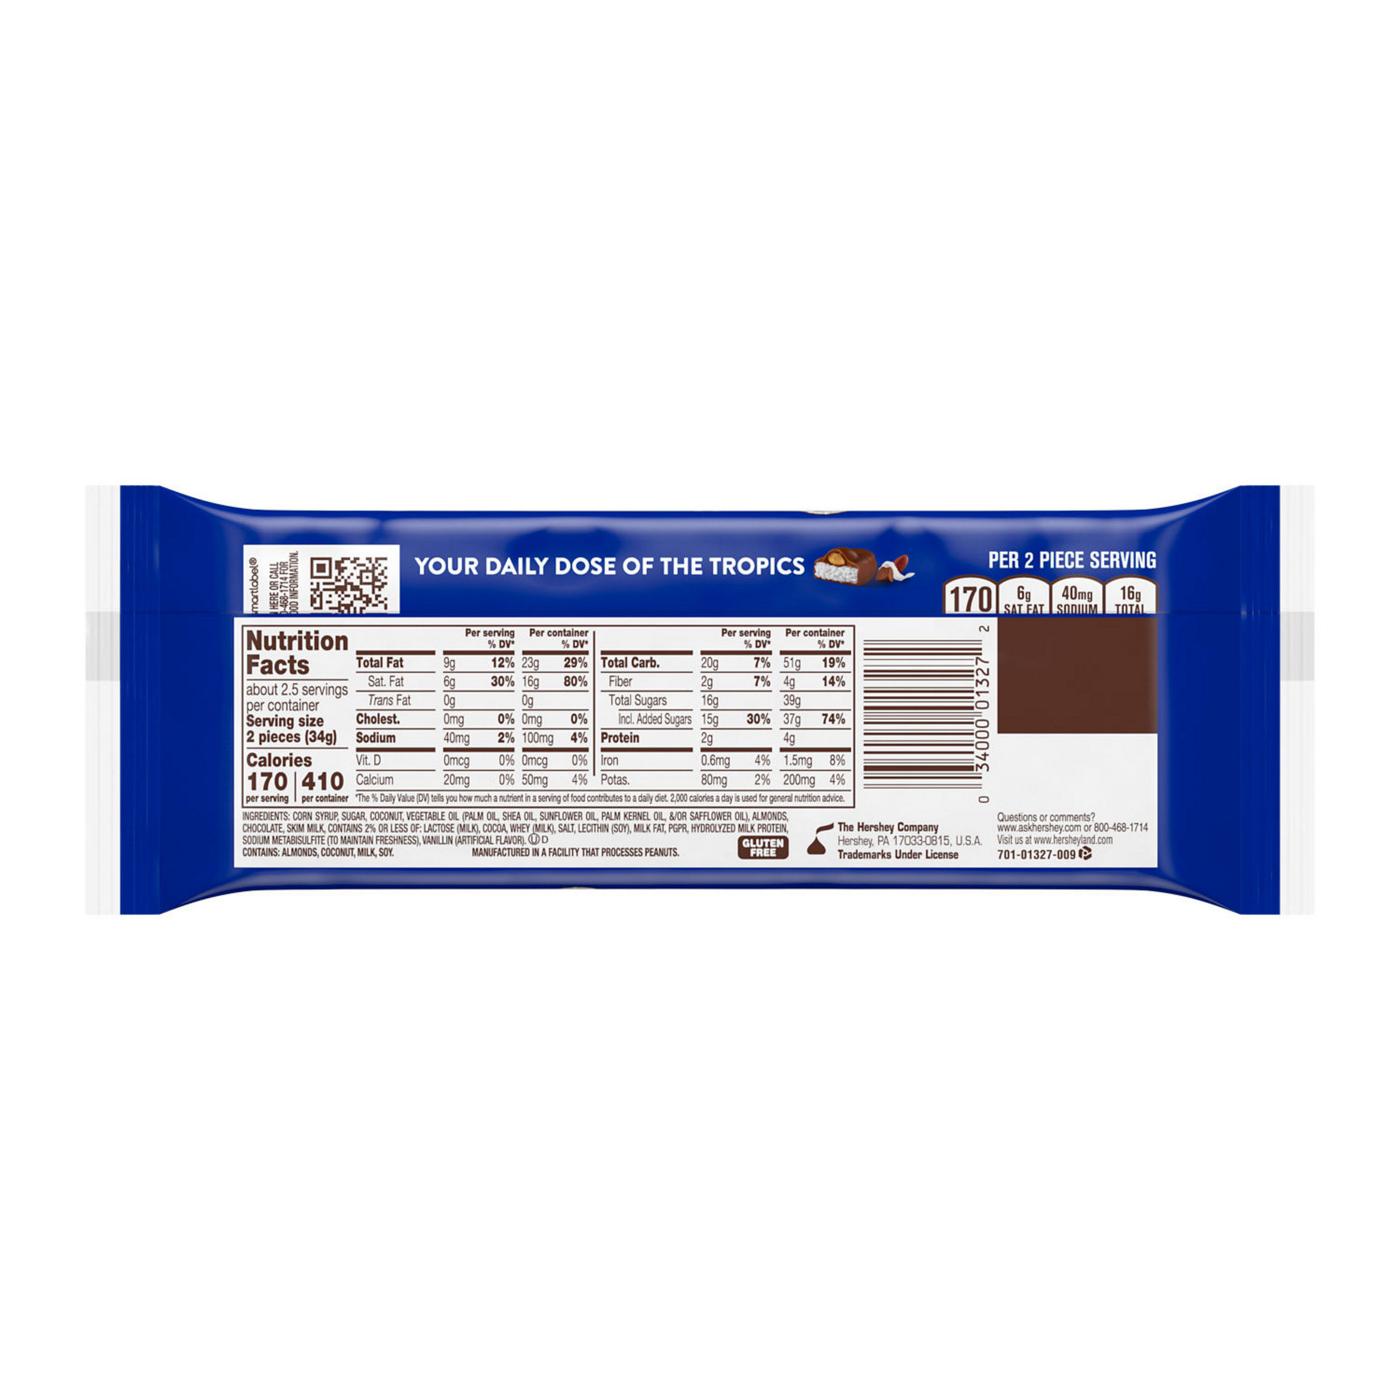 Almond Joy Coconut & Almond Chocolate Snack Size Candy Bars; image 7 of 7